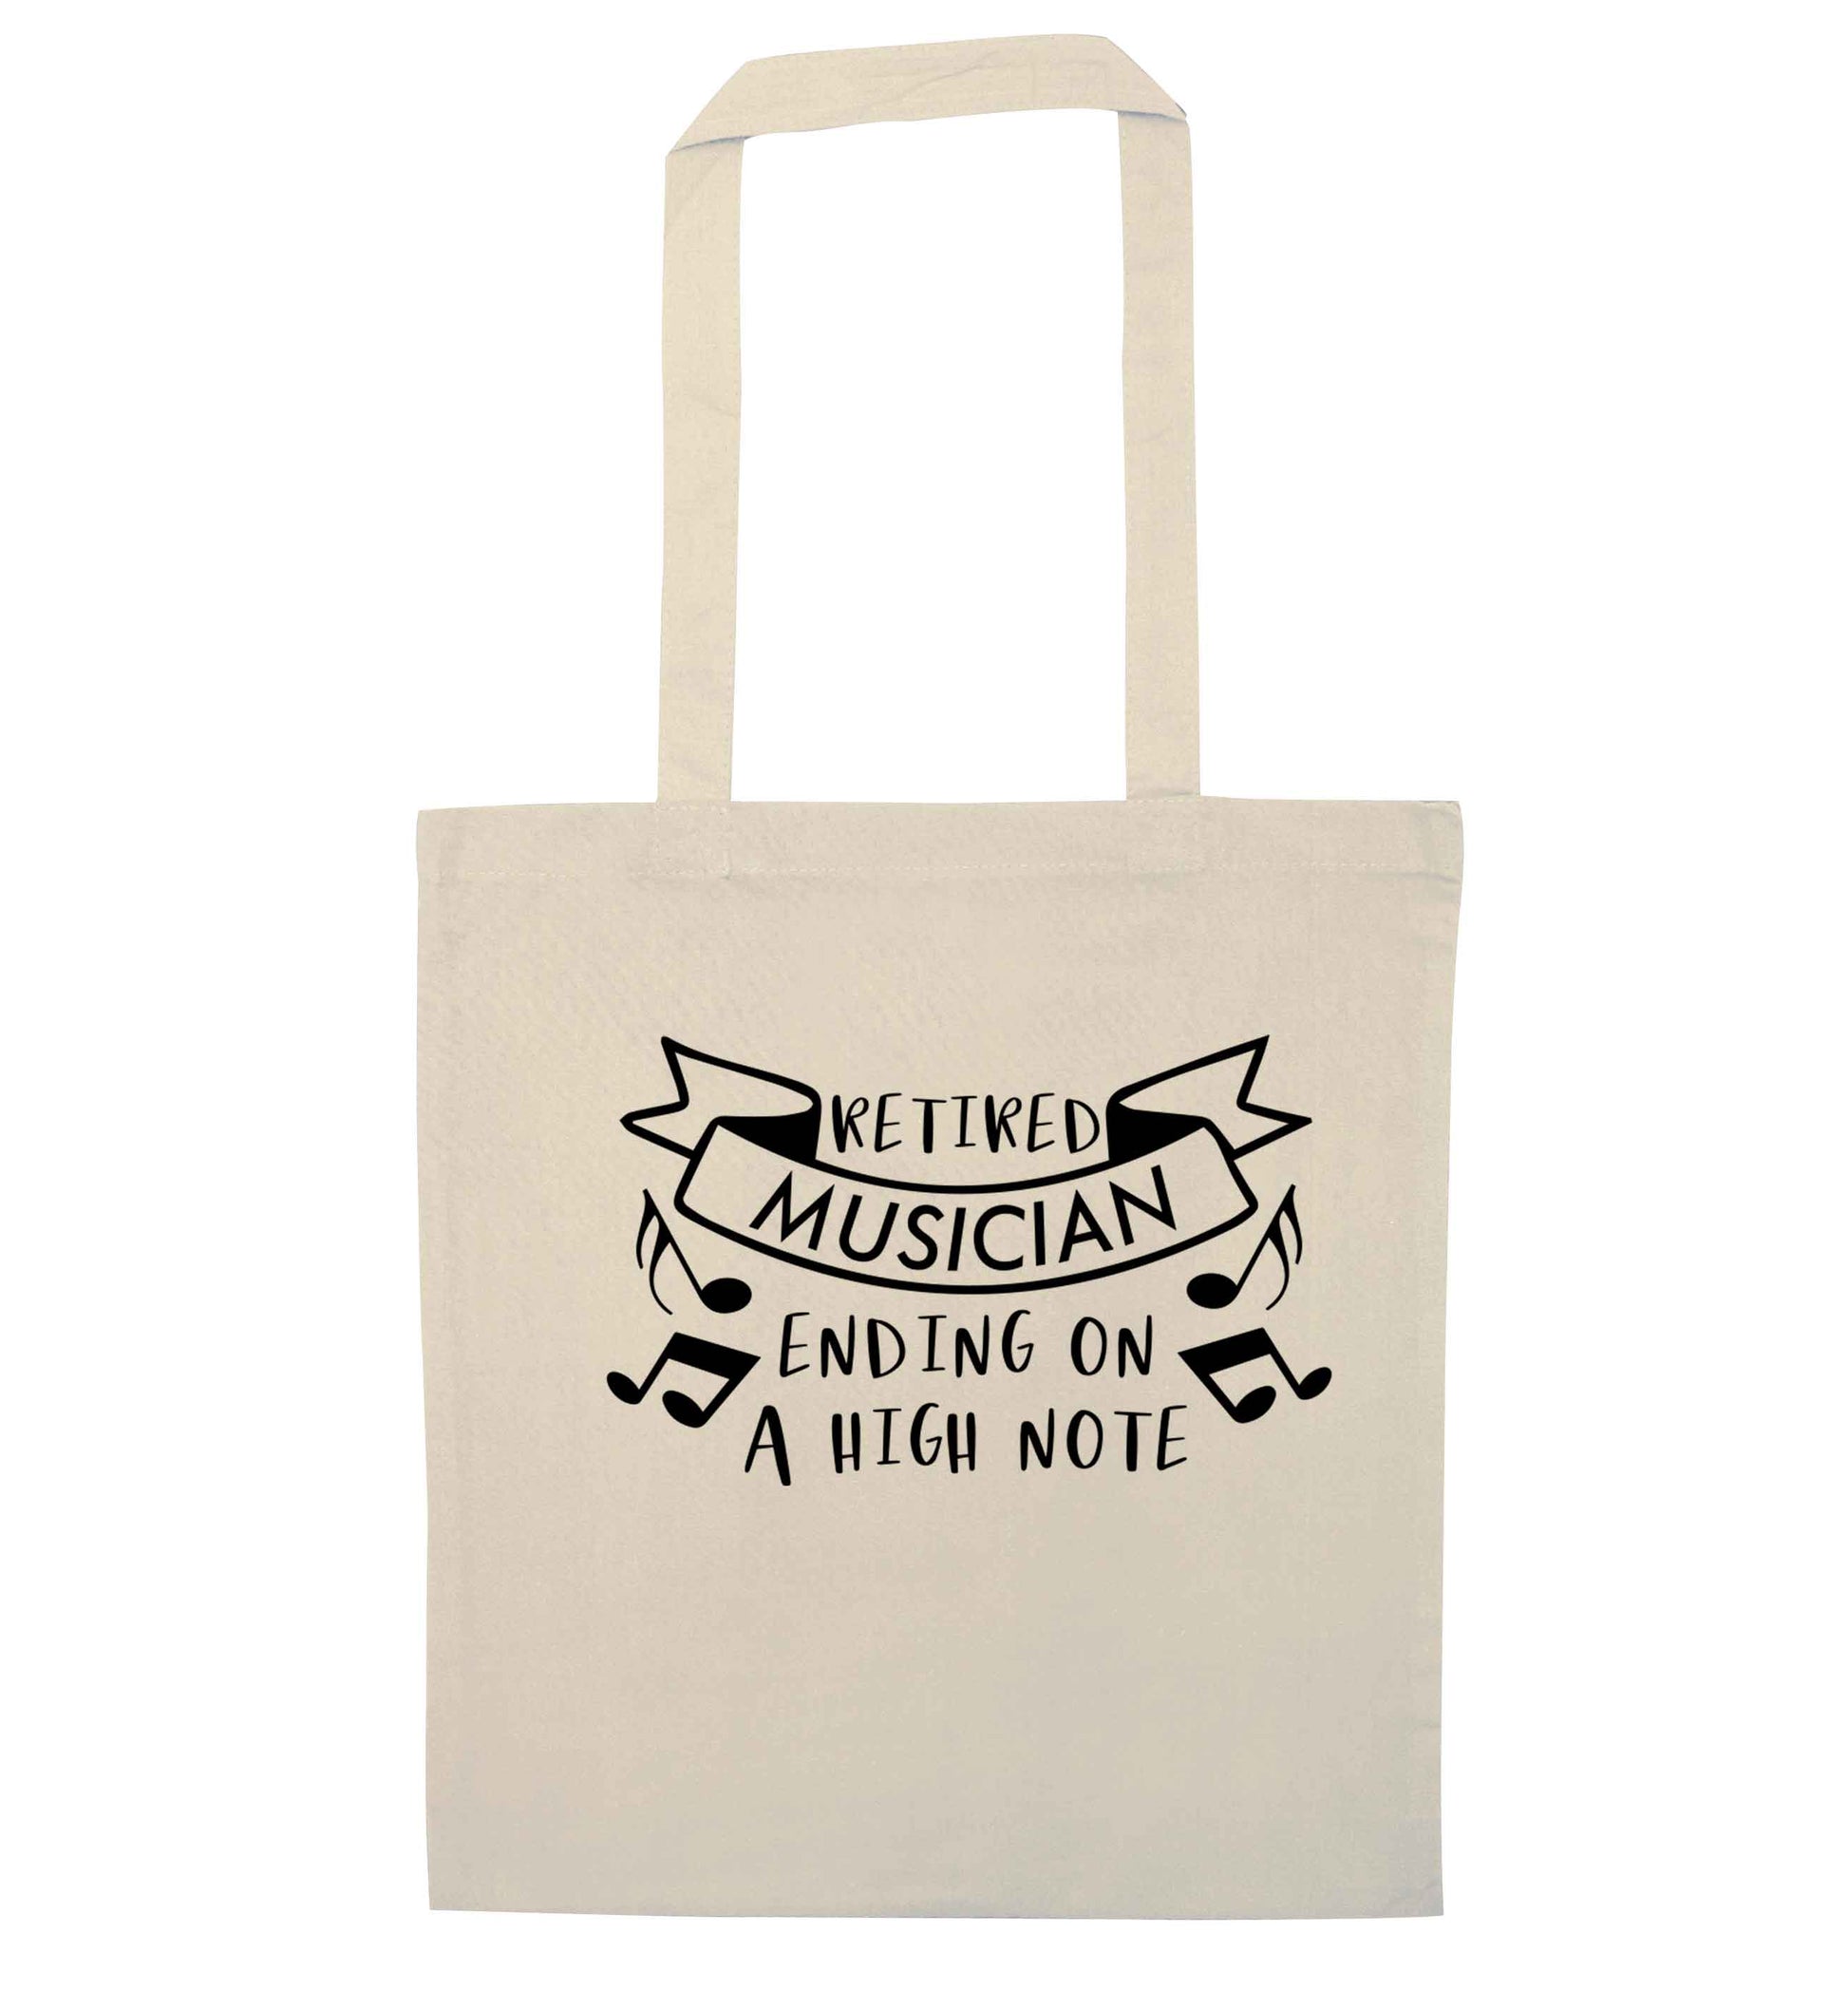 Retired musician ending on a high note natural tote bag